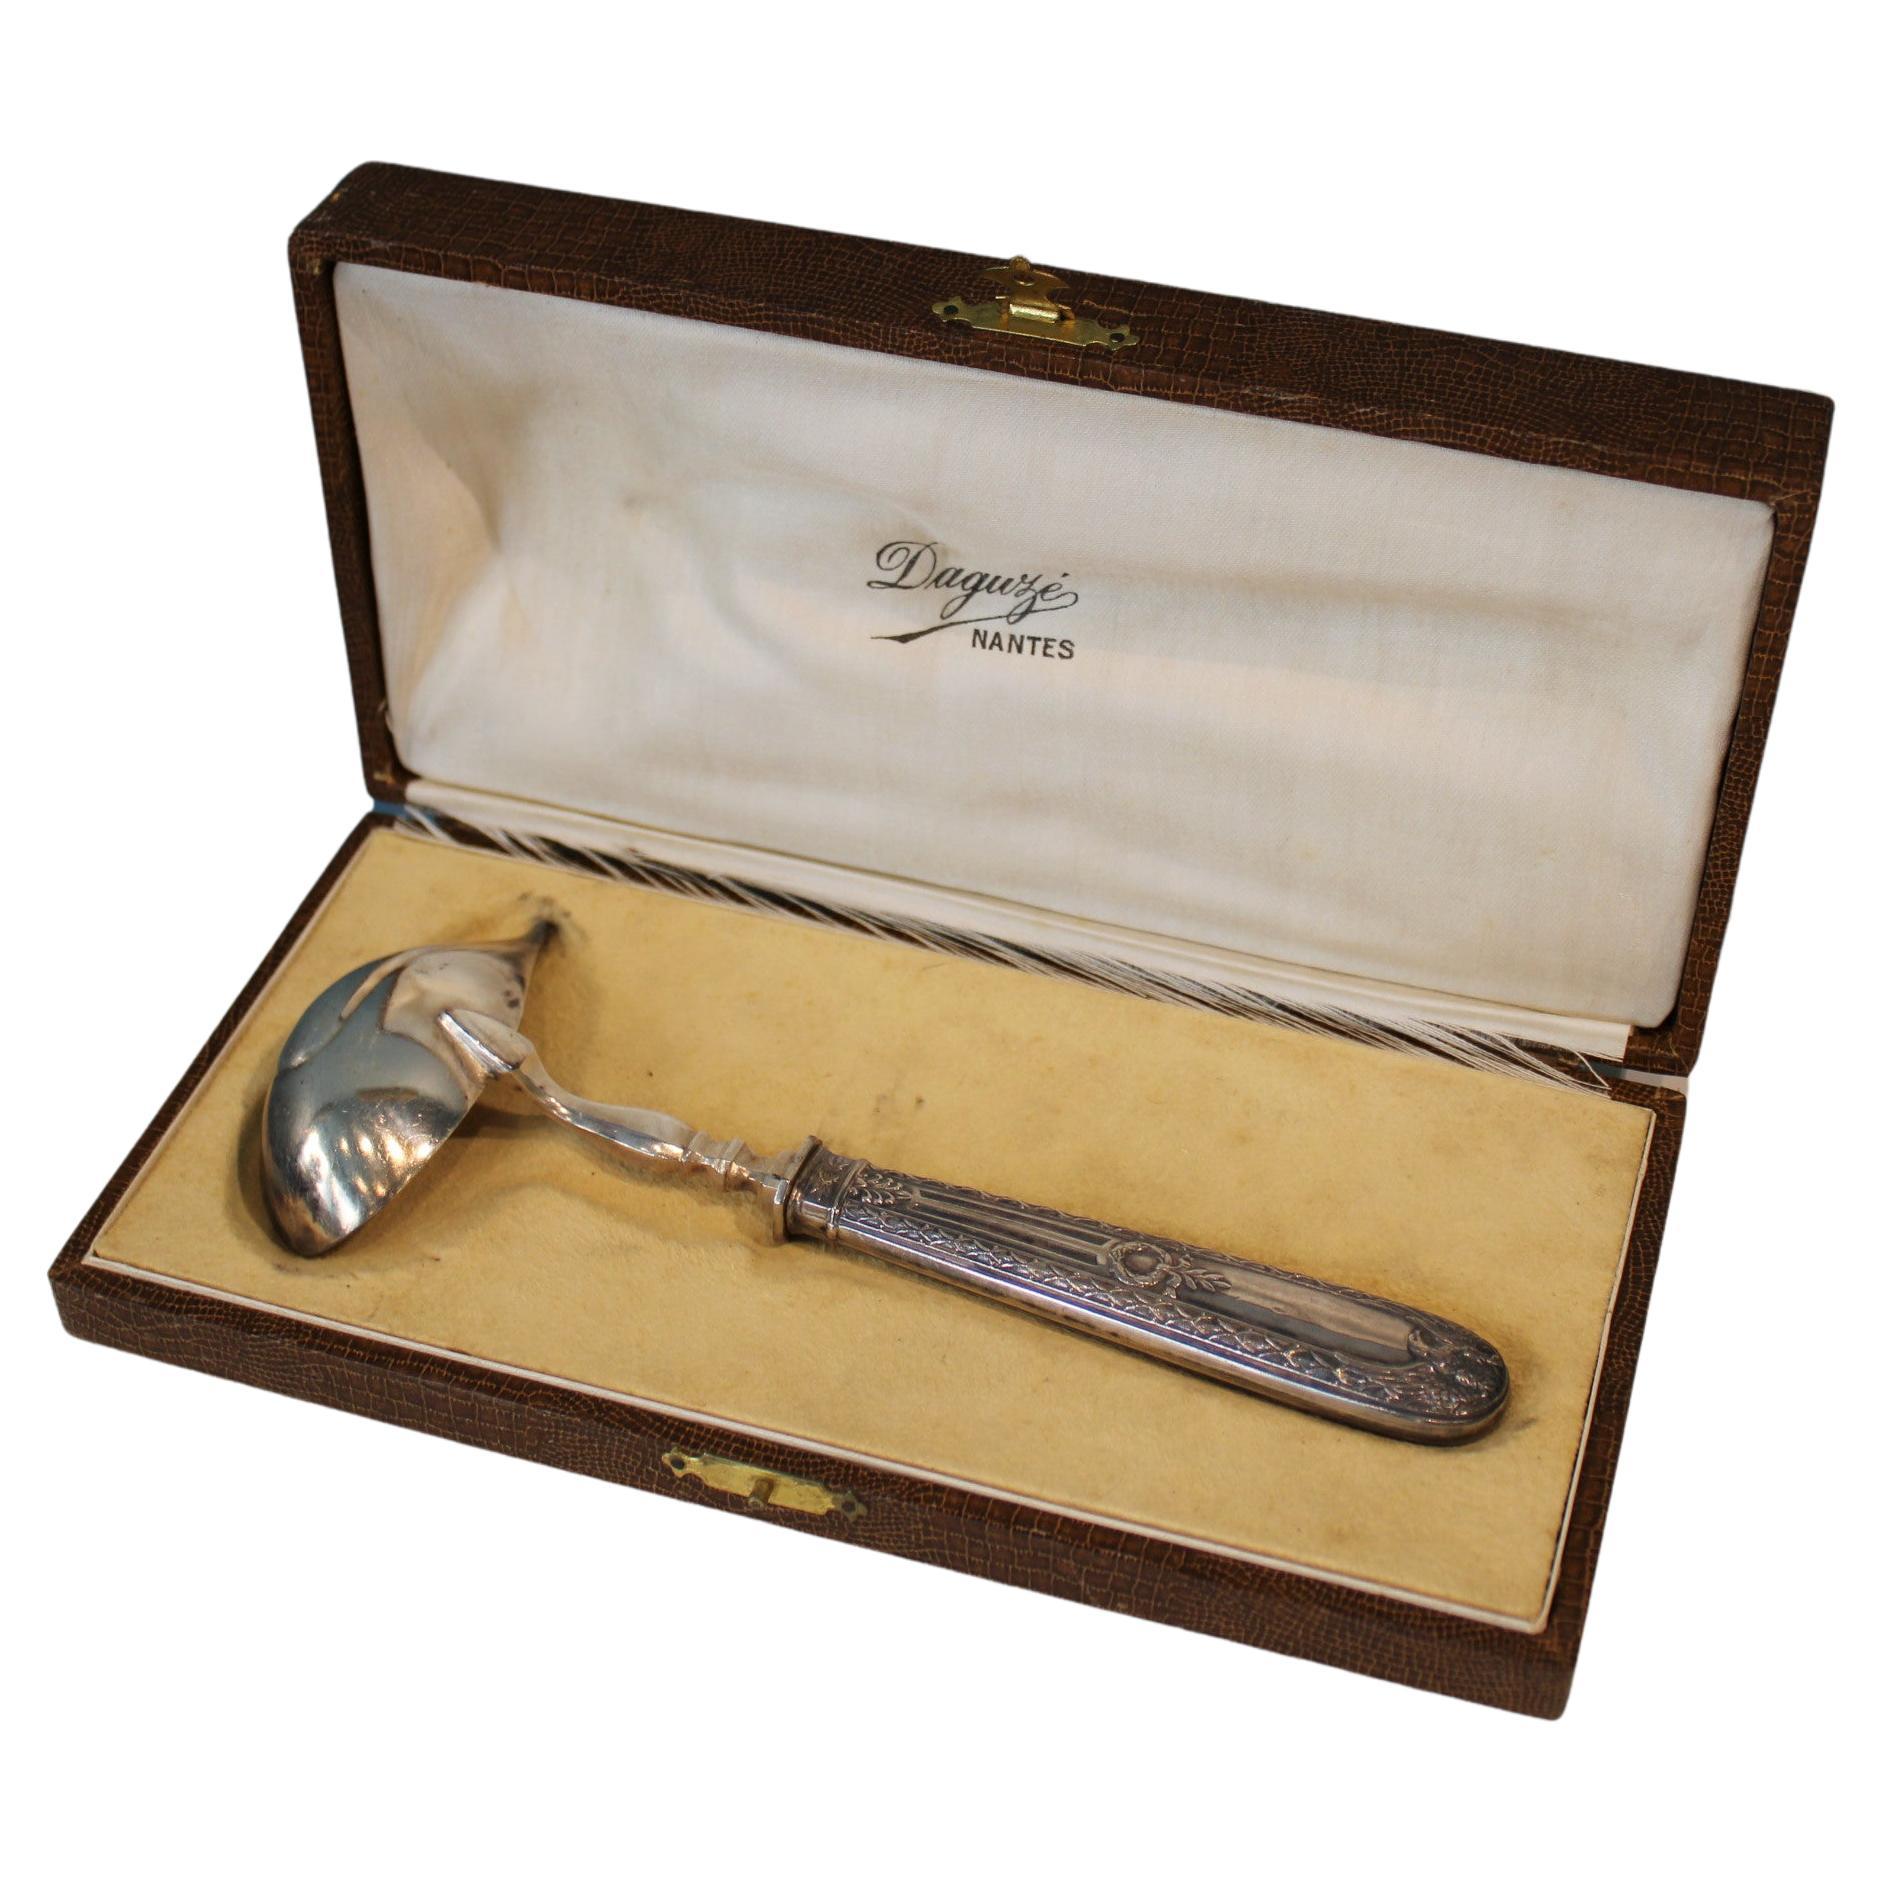 Silver metal gravy spoon in her box For Sale